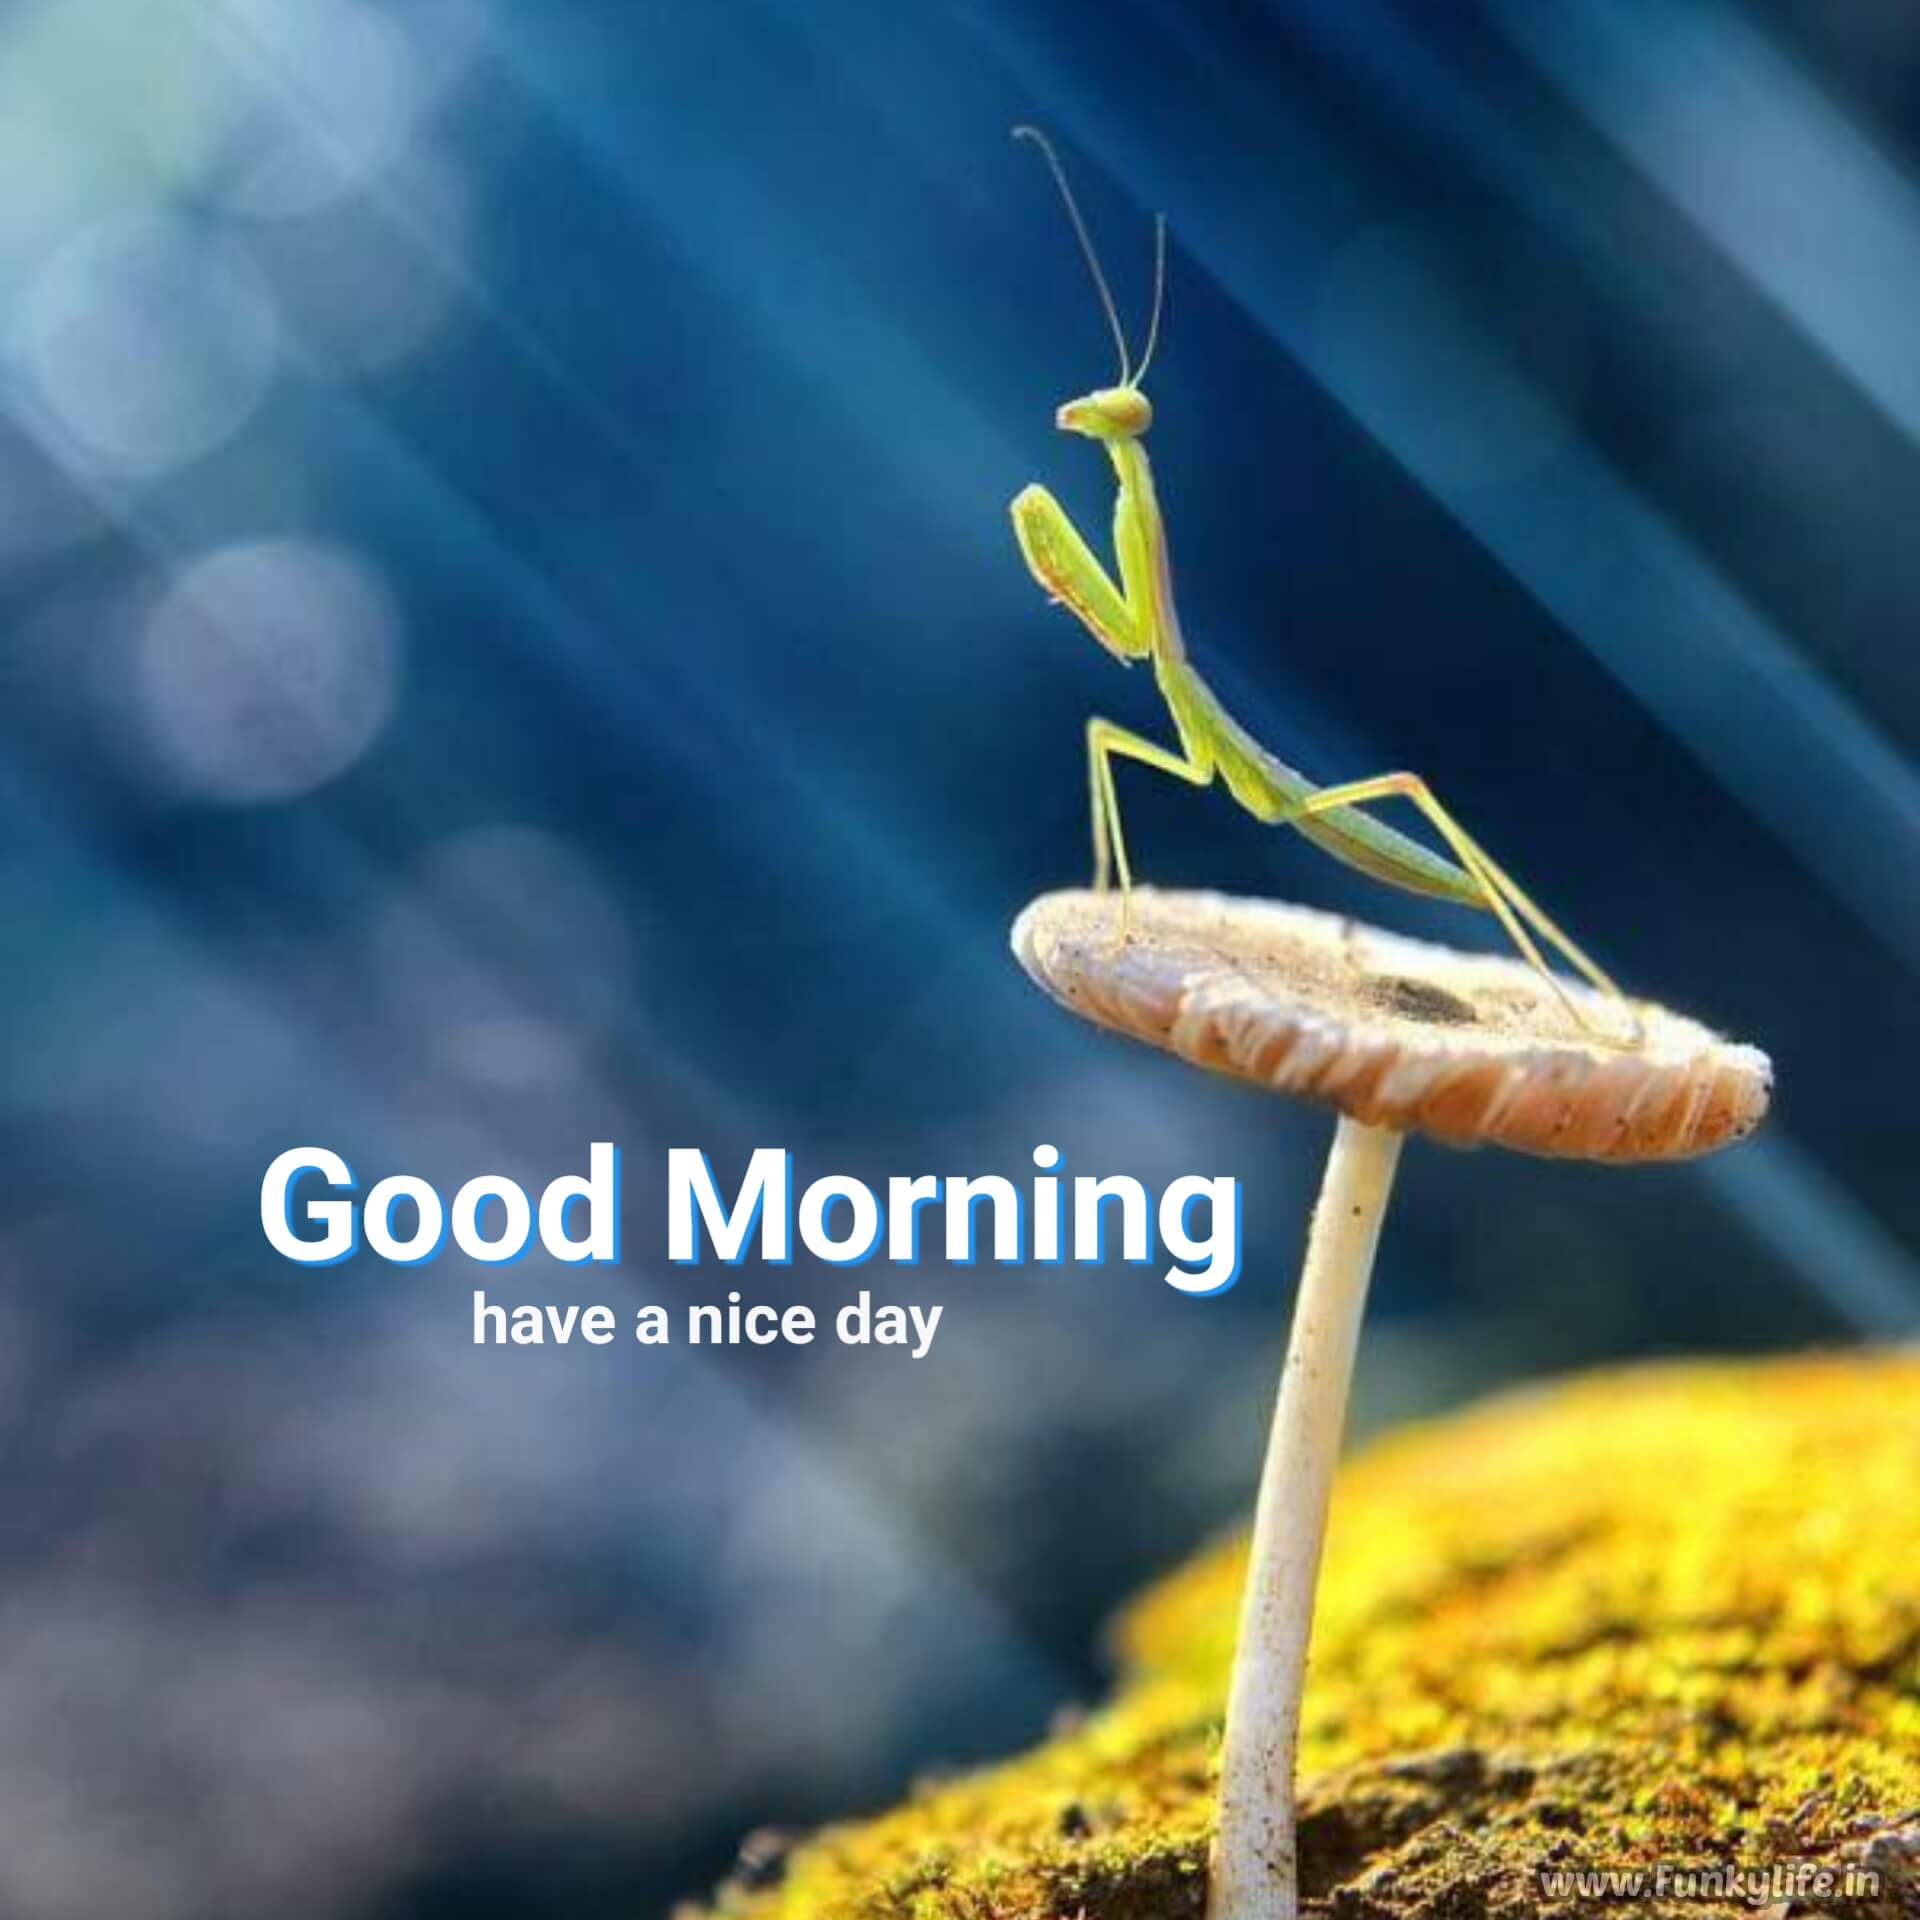 Different Good Morning Image